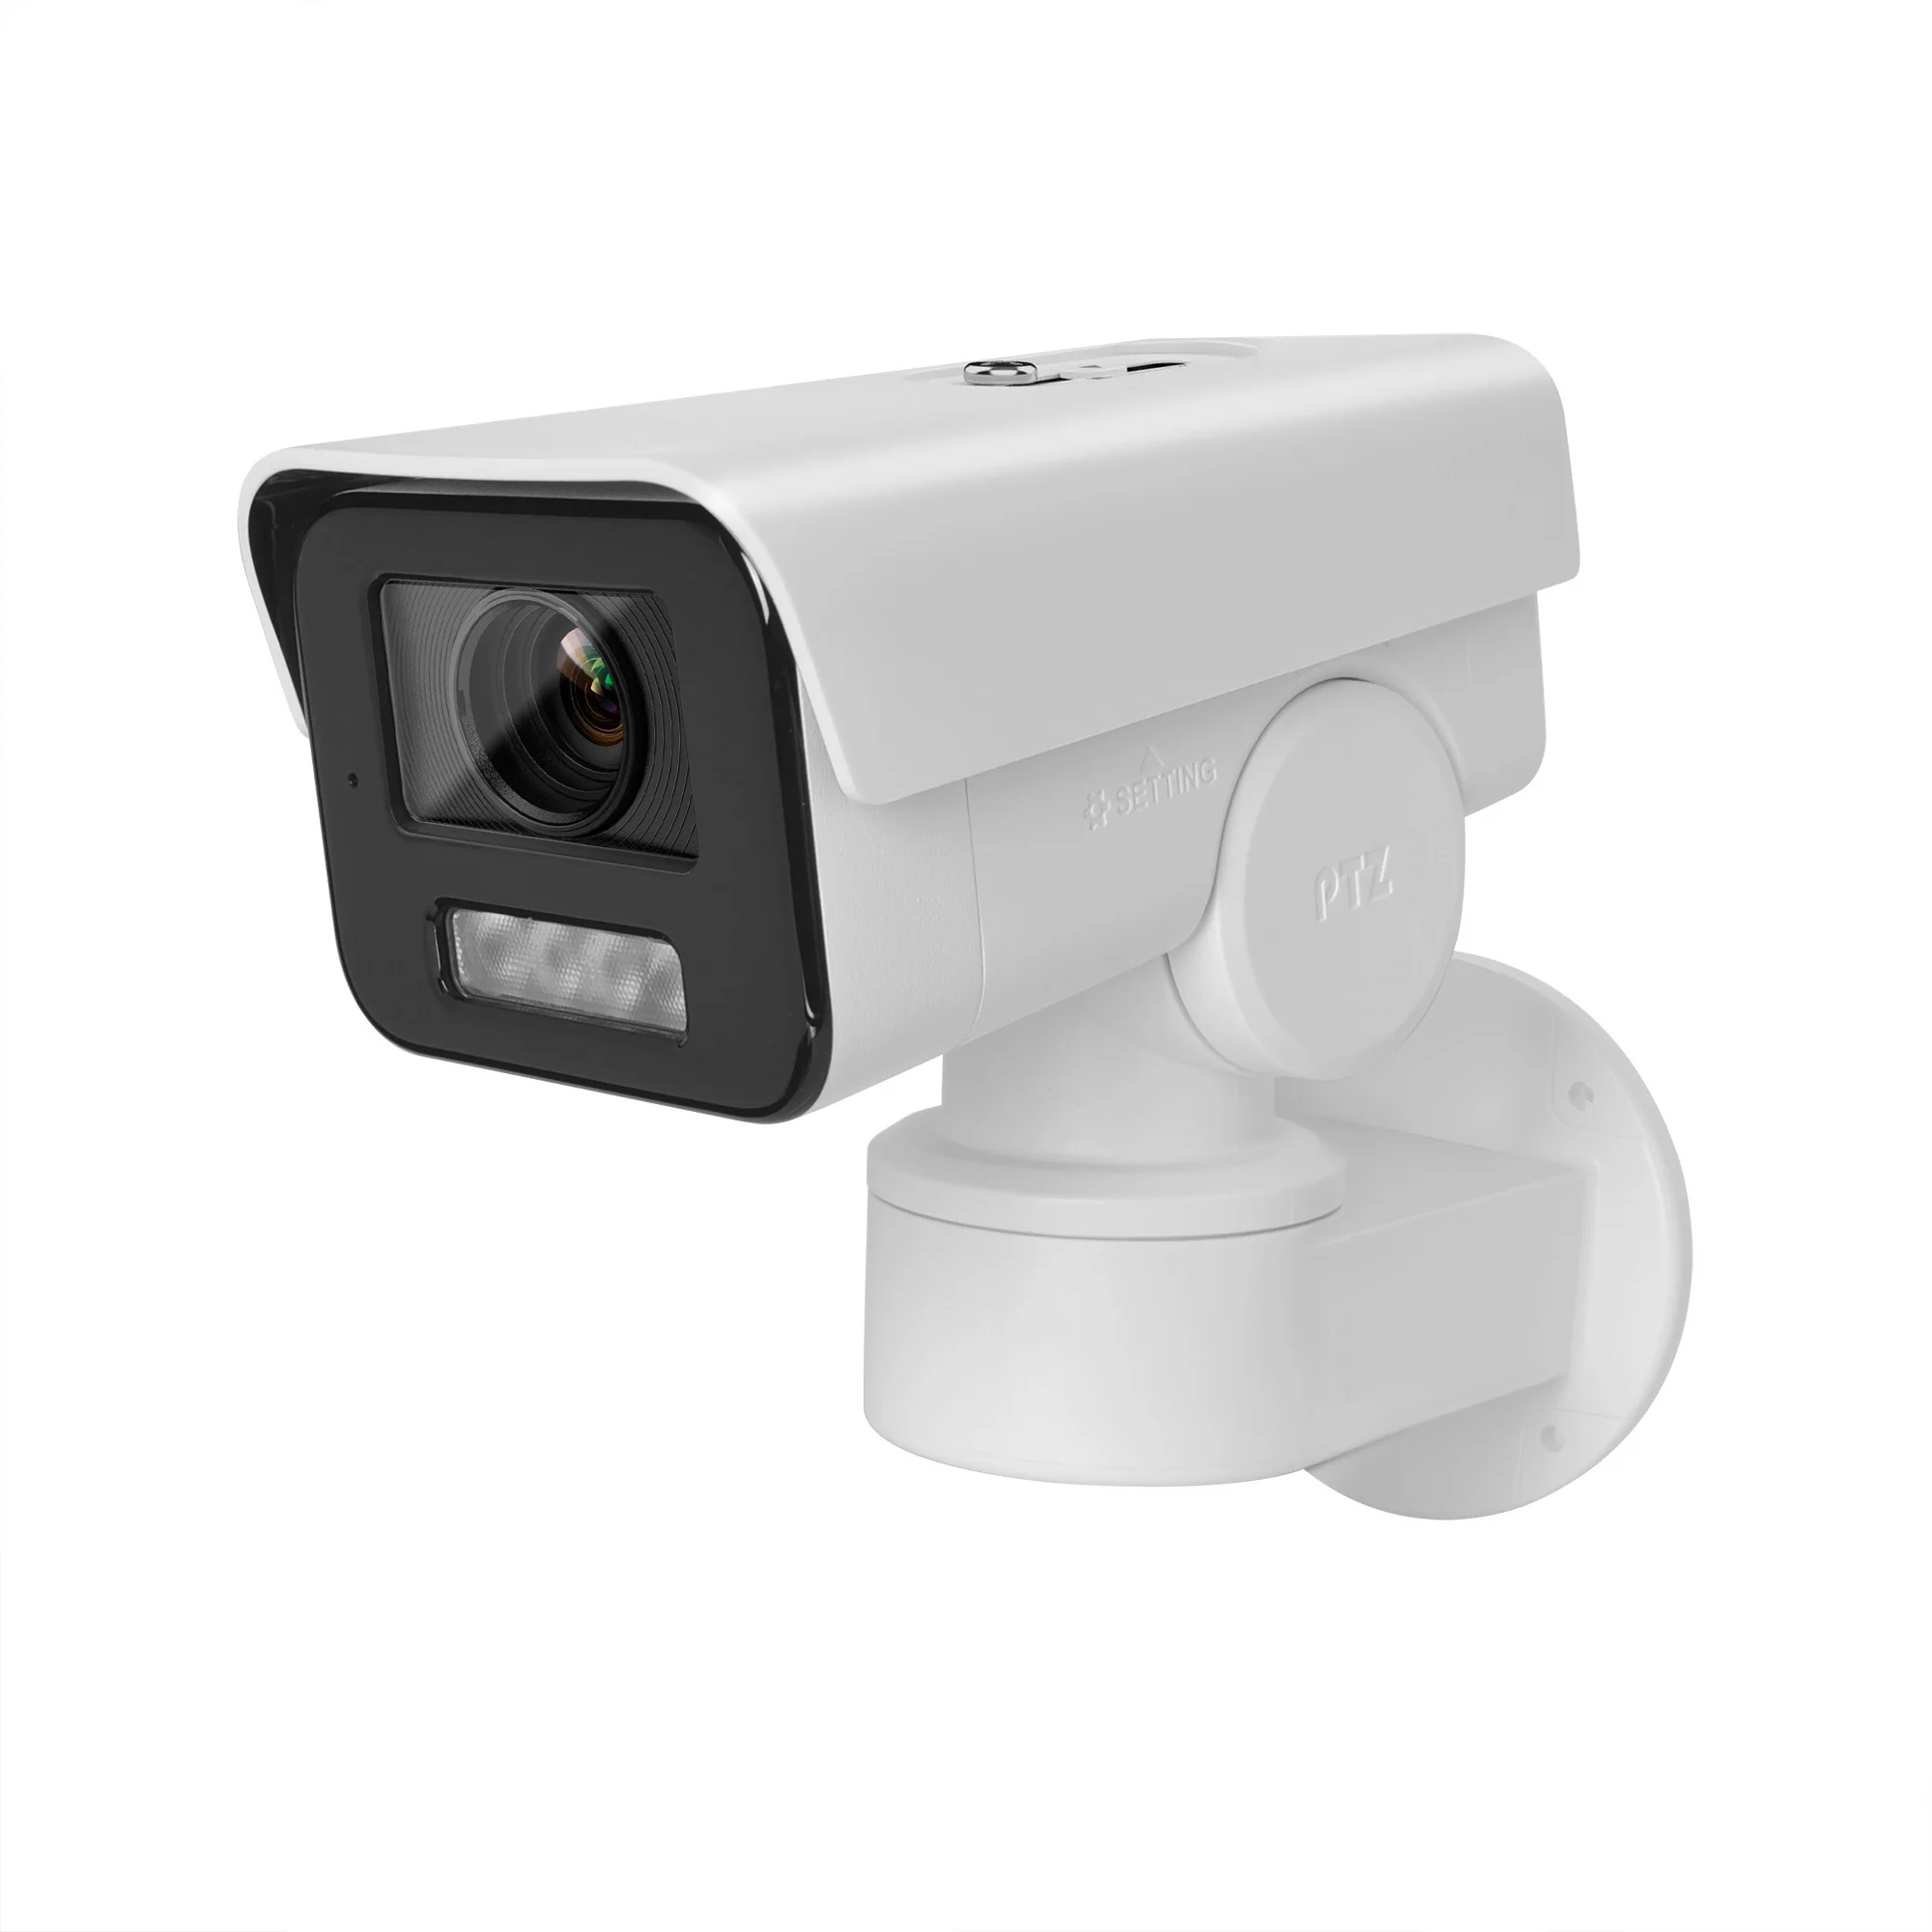 

DS-2CD1A43G0-IZU 4MP 4X Zoom PT Bullet IP Camera IR50M SD Card Slot WDR Built-in Microphone Surveillance Network